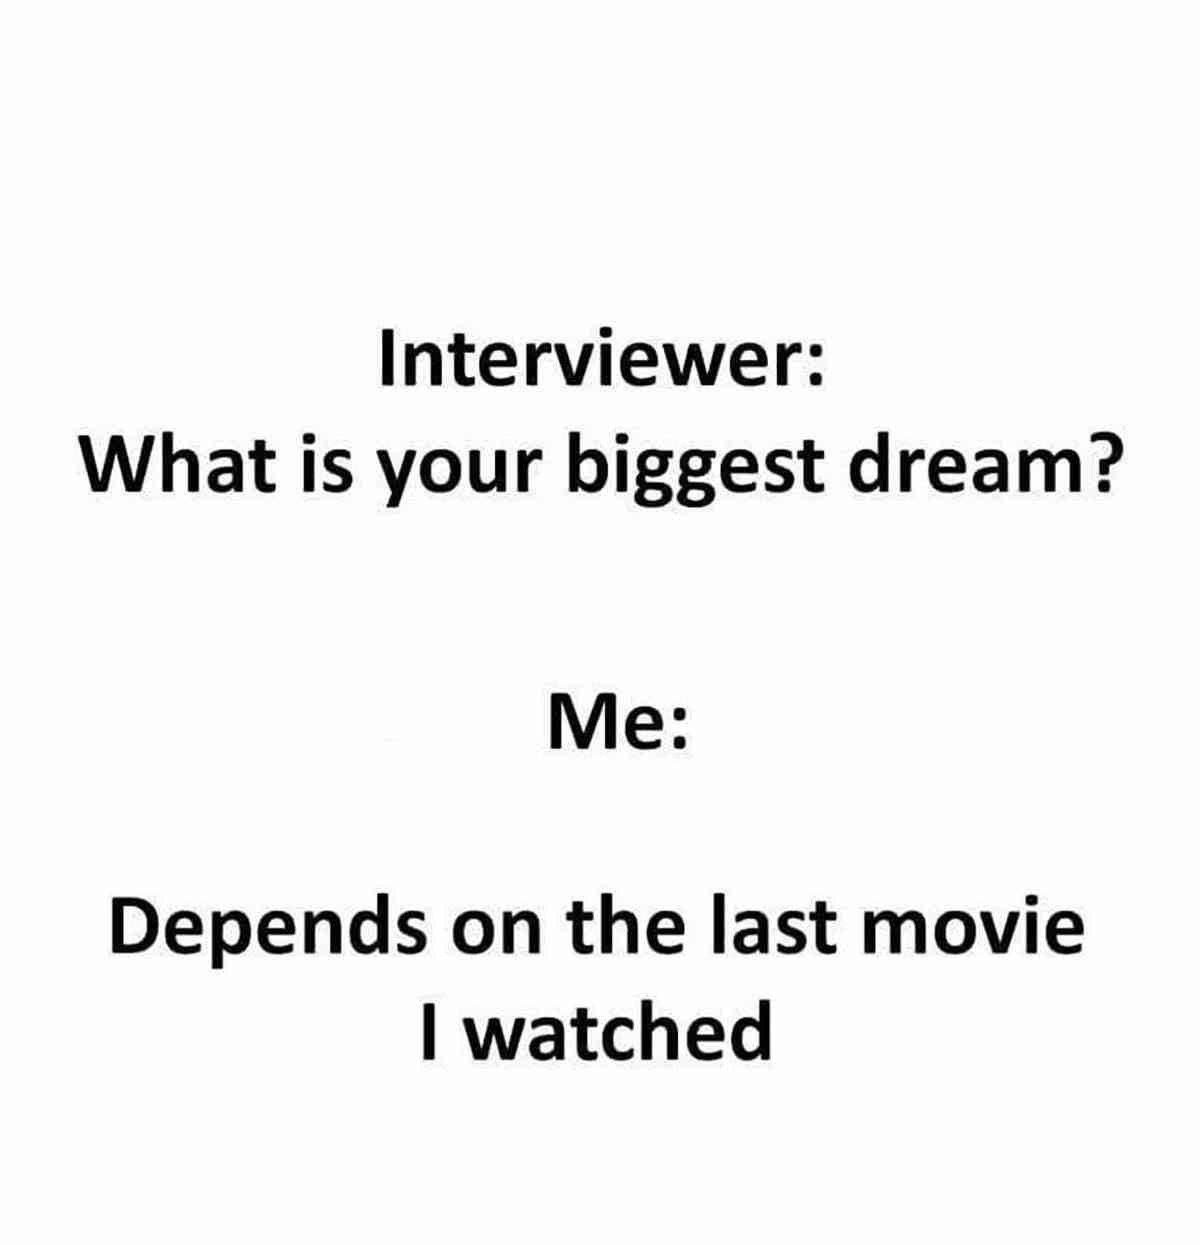 What is your Biggest dream?